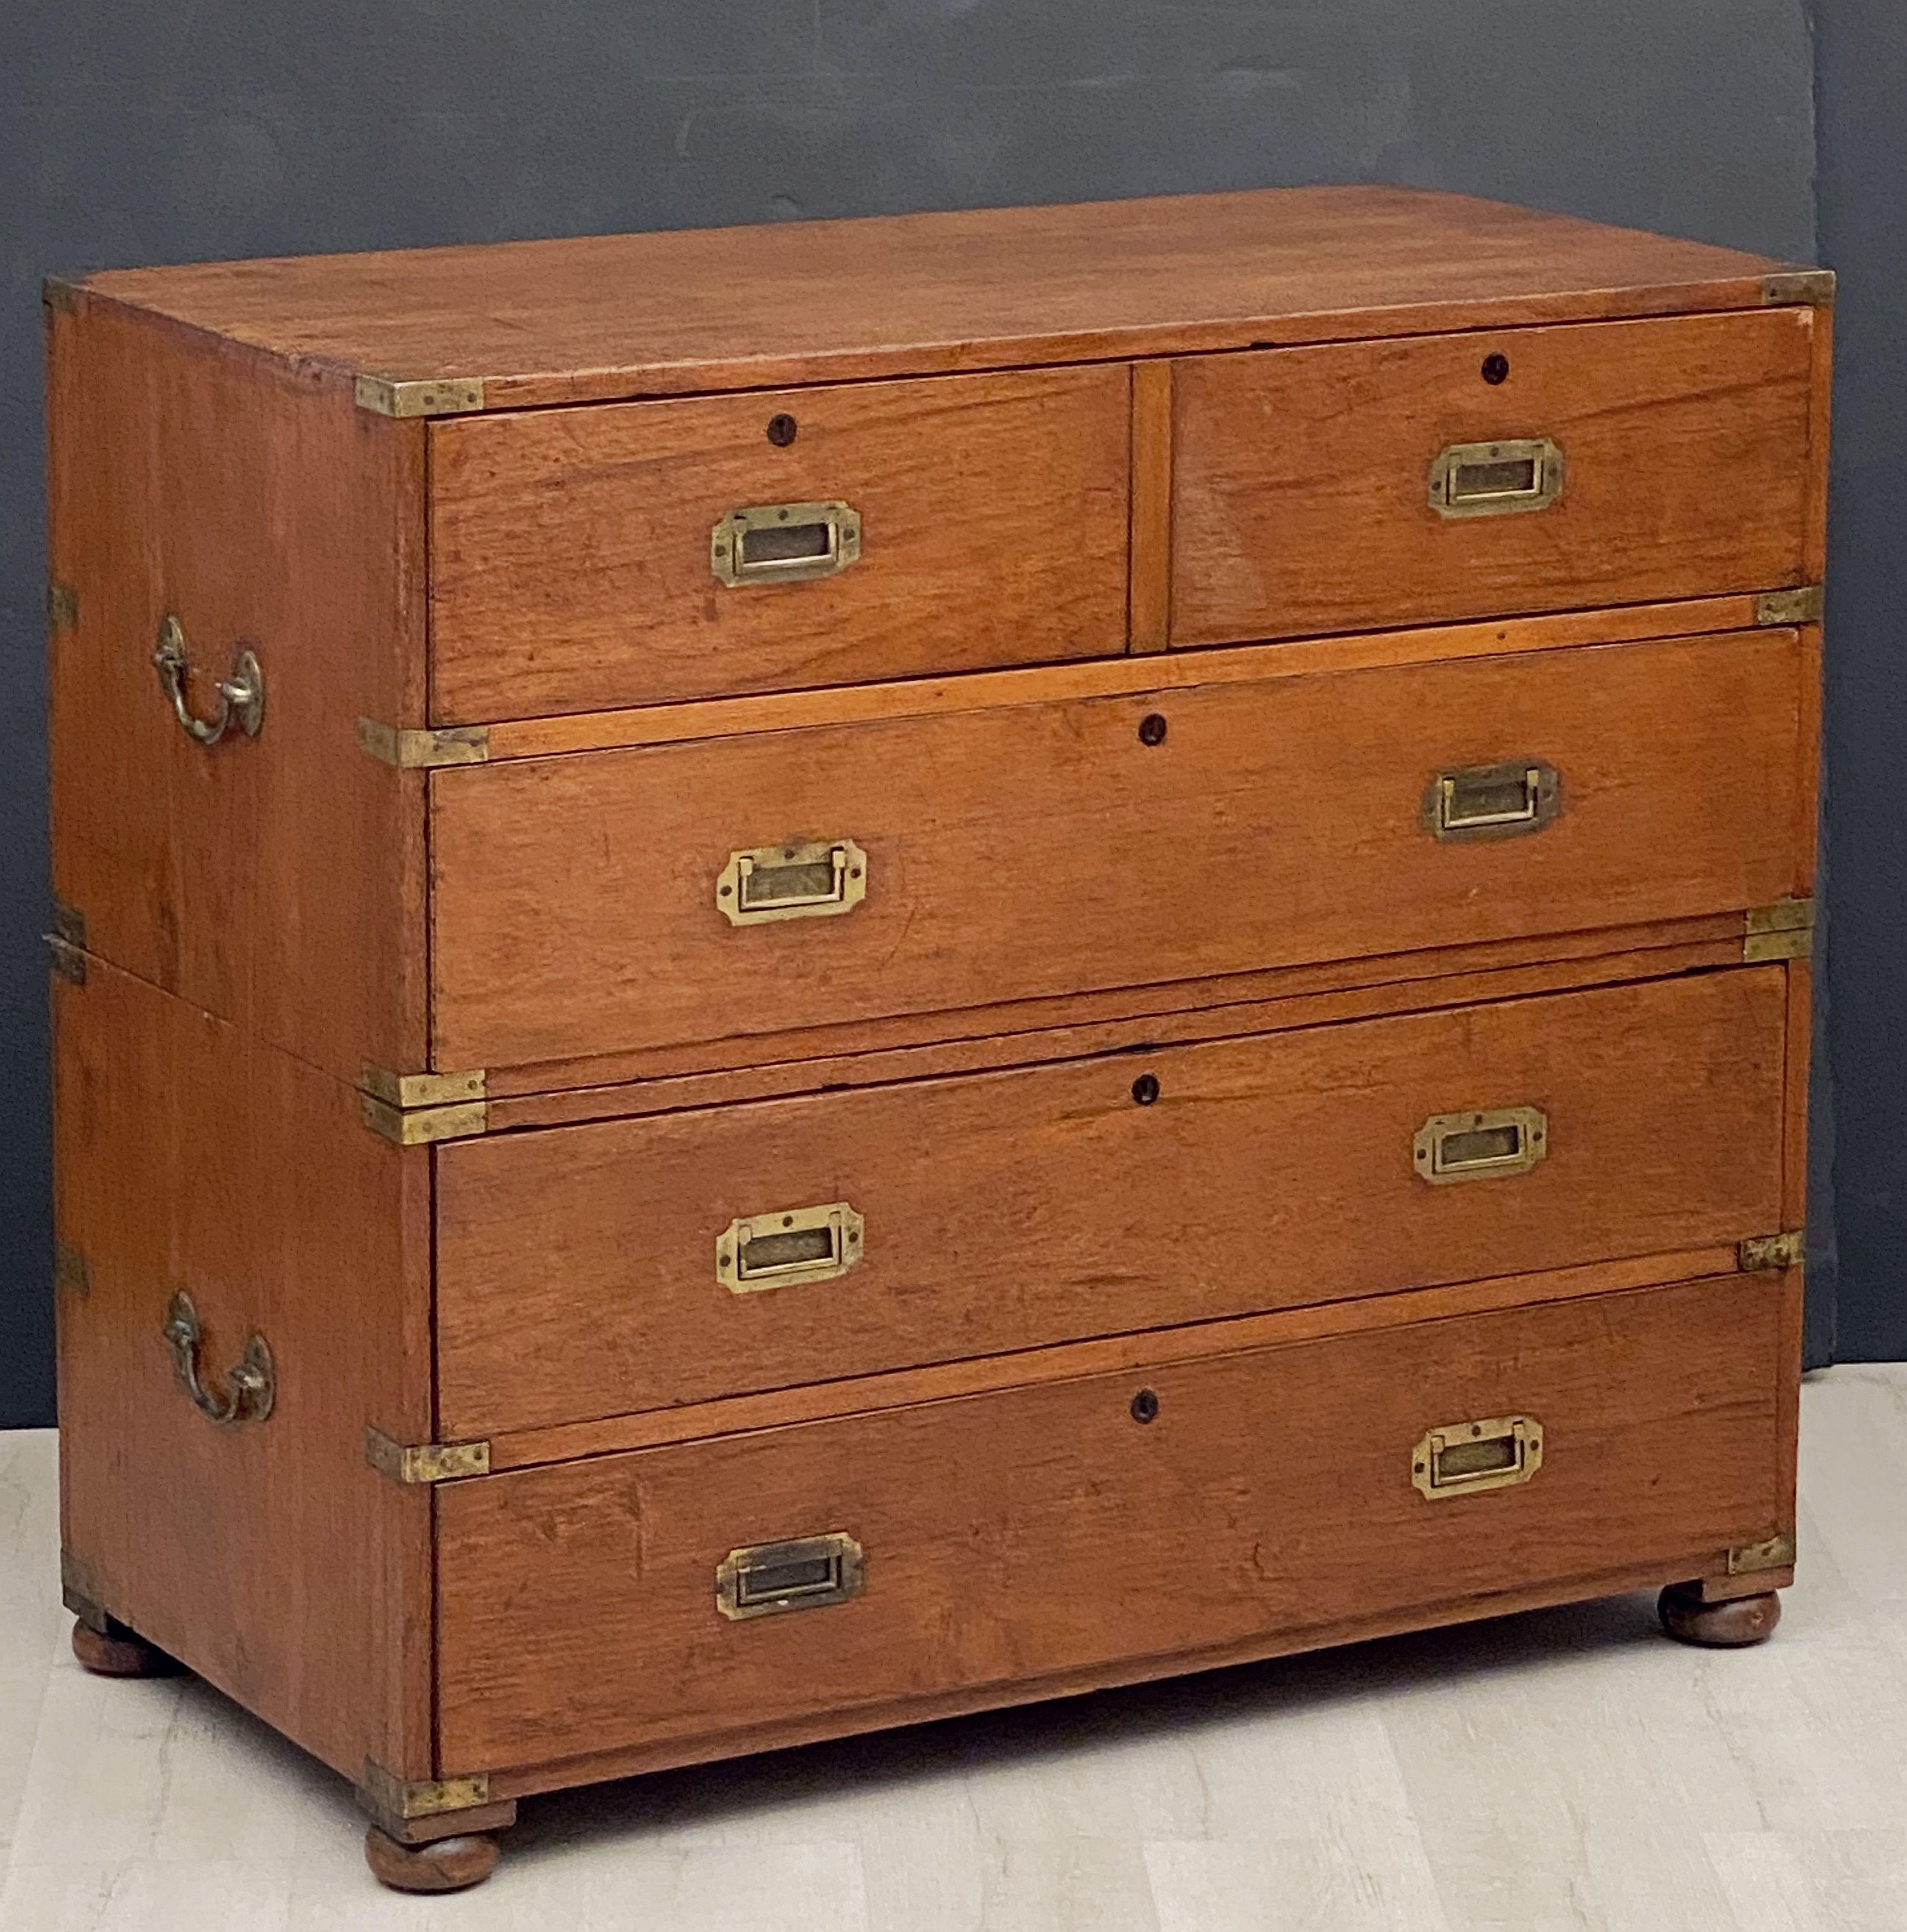 19th Century English Officer's Campaign Chest Secretaire of Teak and Brass